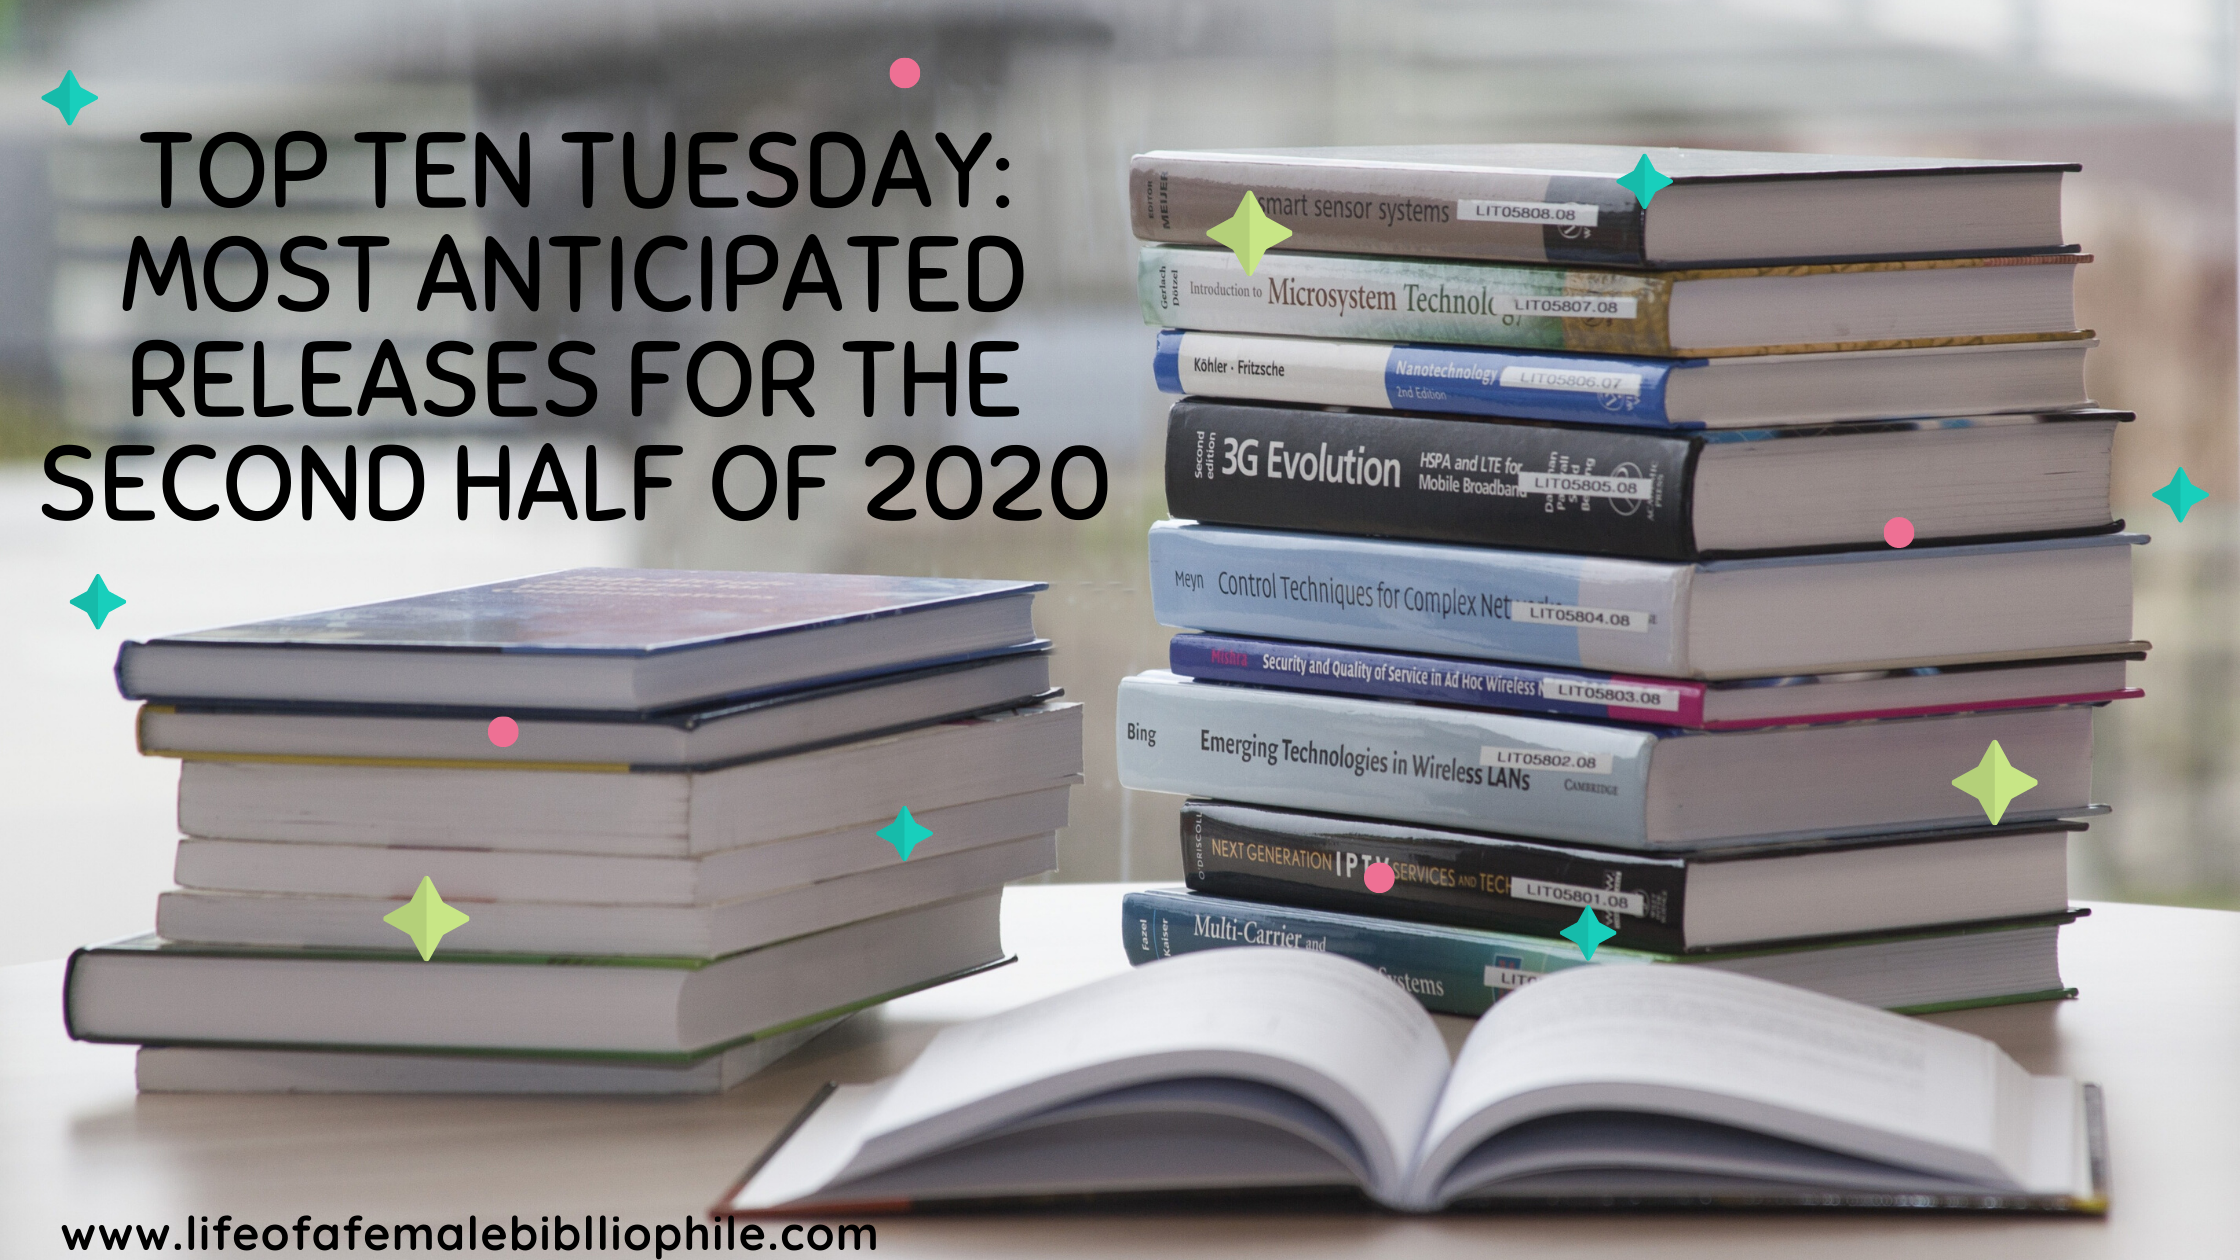 Top Ten Tuesday: Most Anticipated Releases for the Second Half of 2020